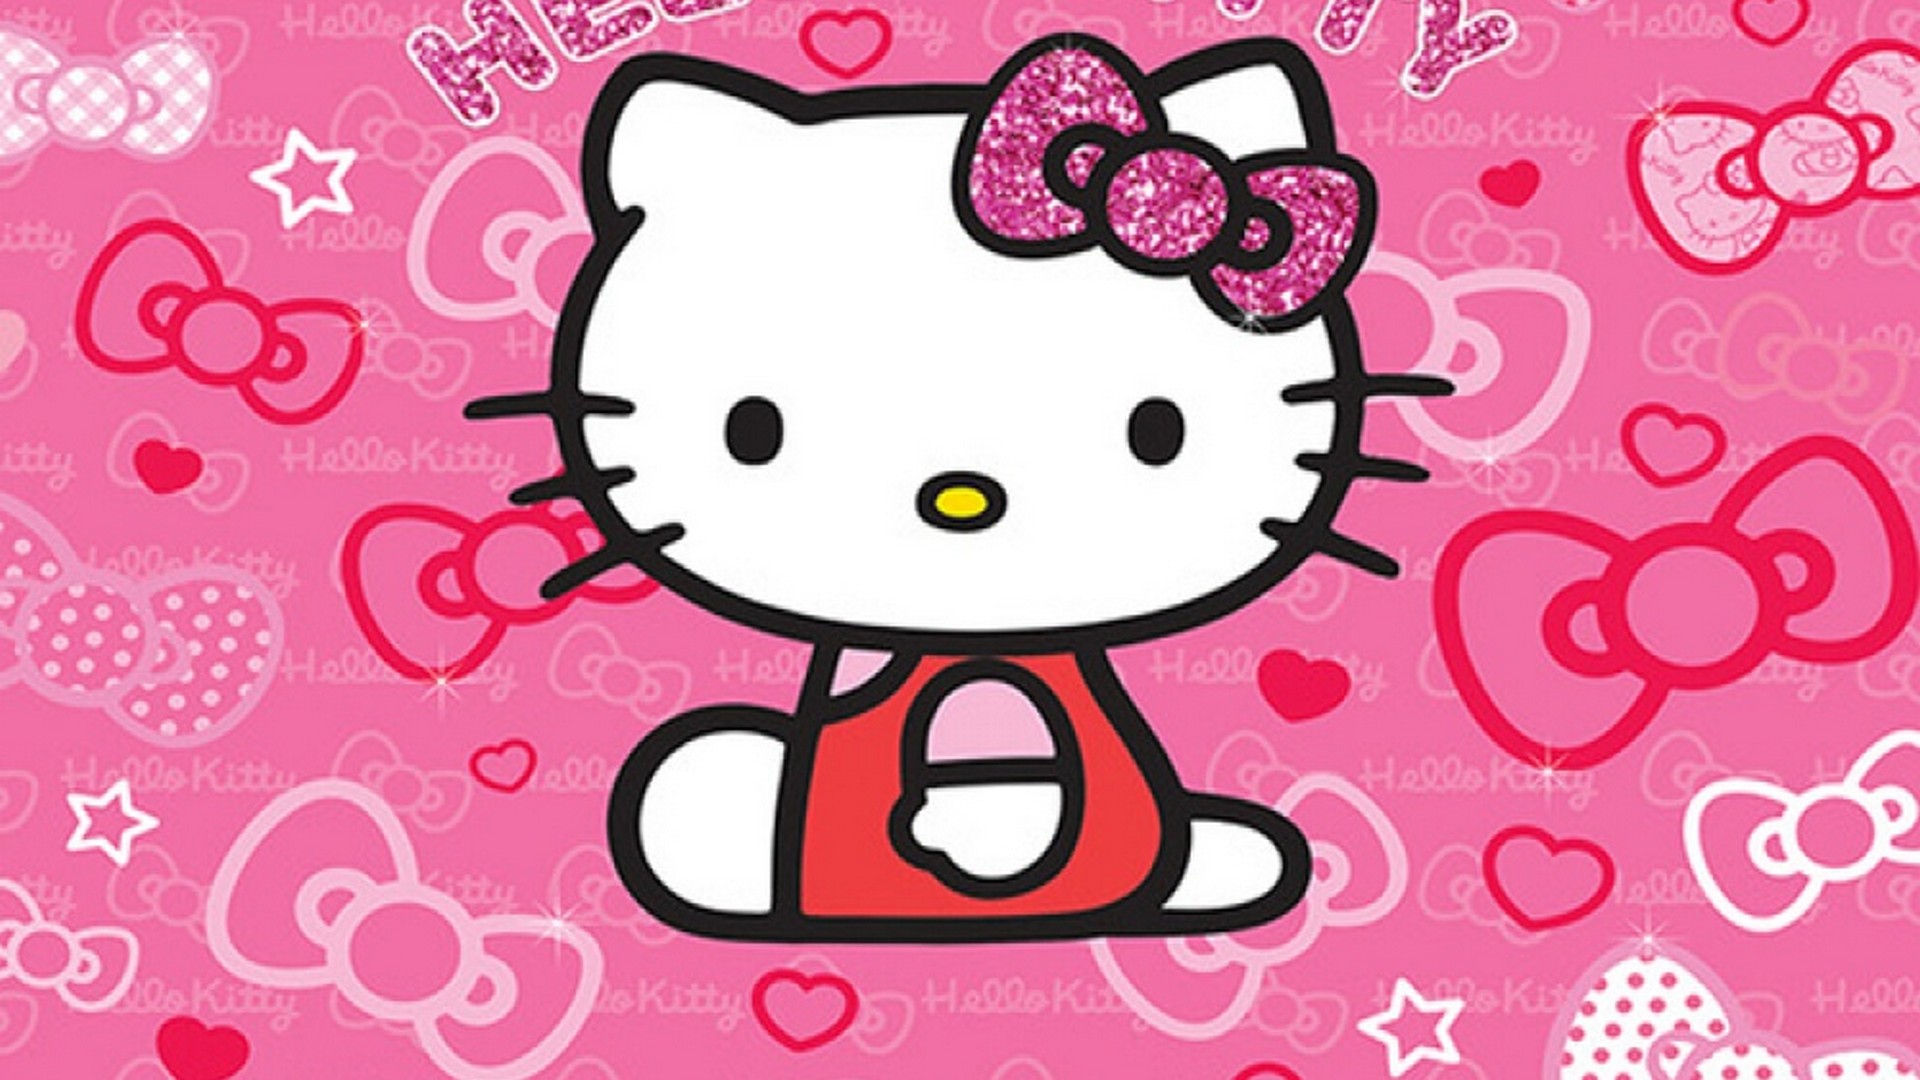 Wallpaper Sanrio Hello Kitty Desktop with image resolution 1920x1080 pixel. You can use this wallpaper as background for your desktop Computer Screensavers, Android or iPhone smartphones